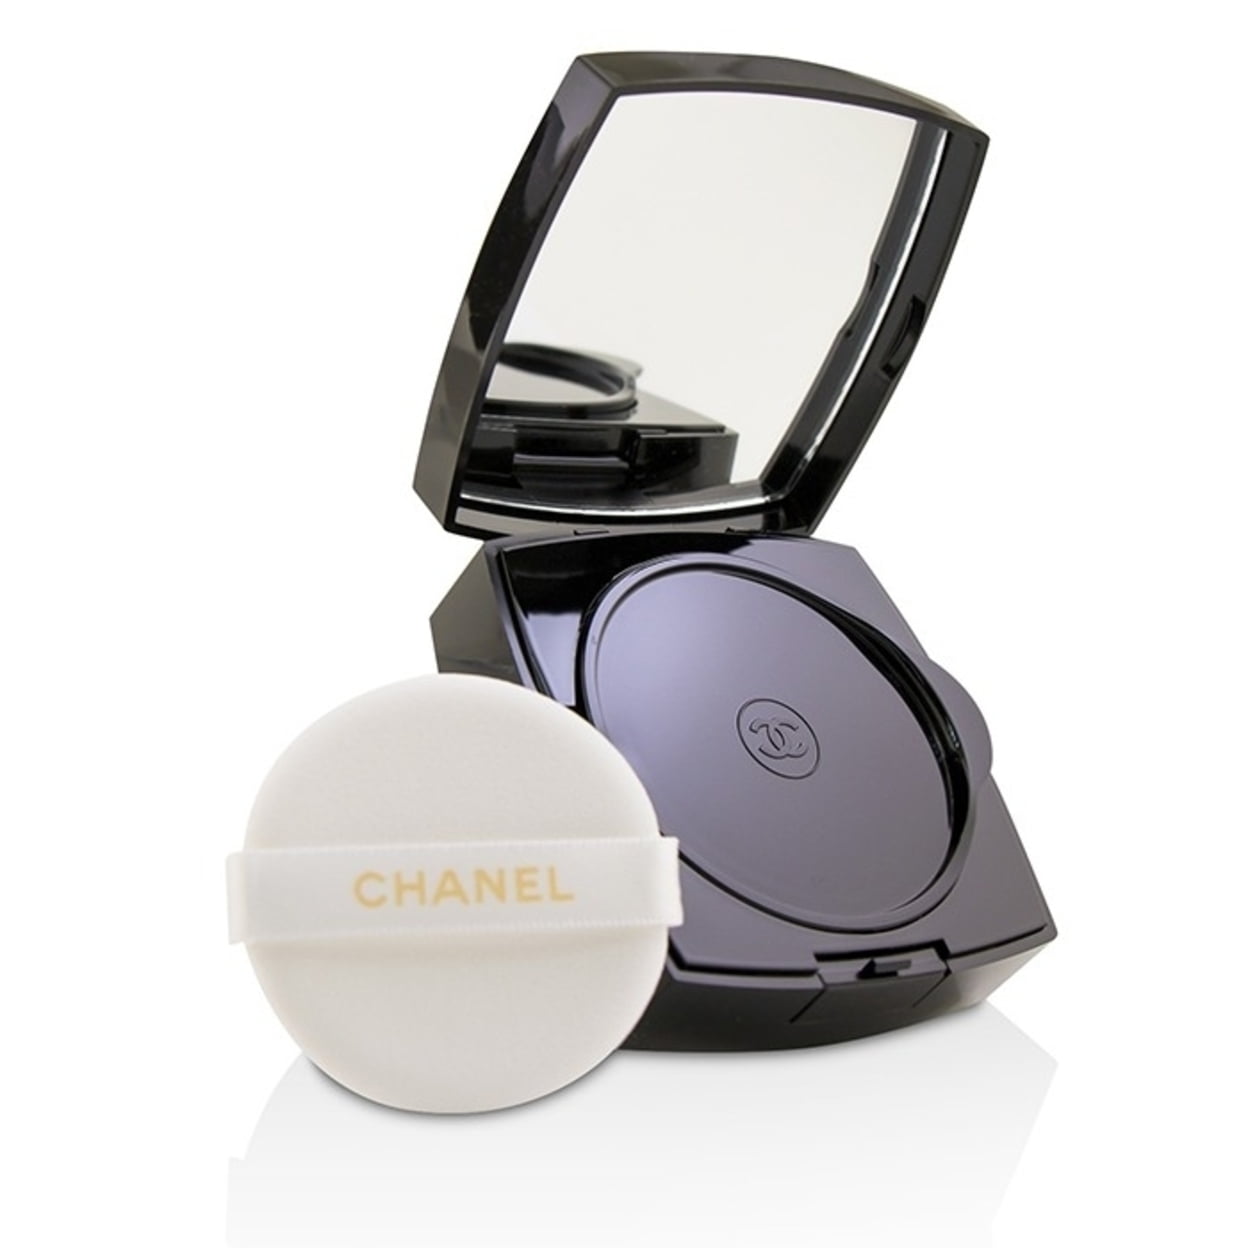 les beiges chanel sunkissed